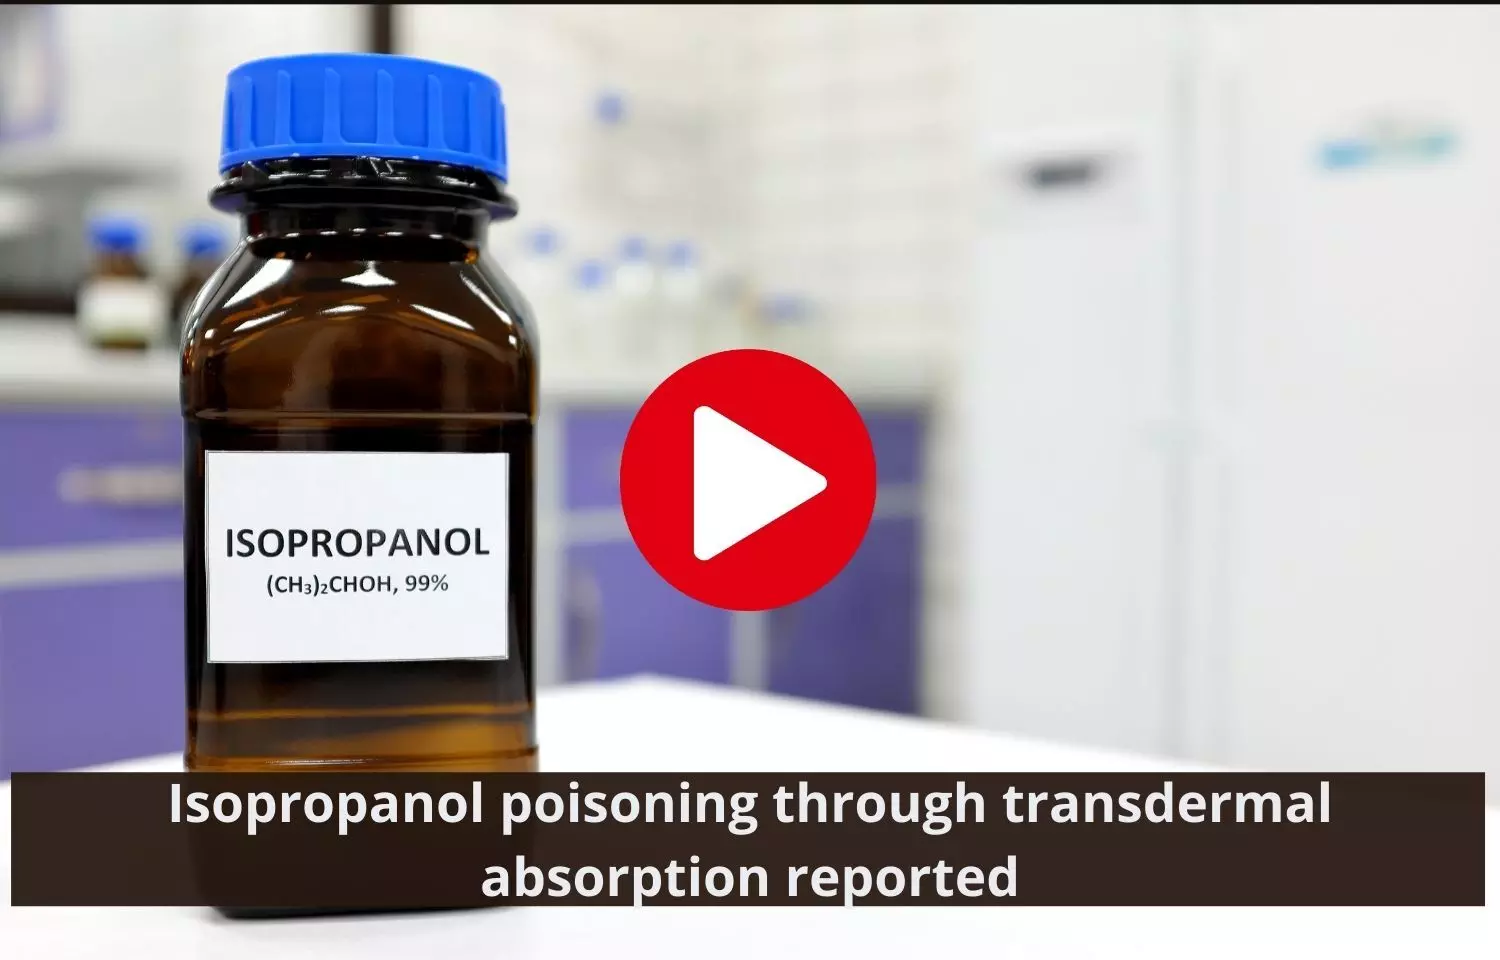 Isopropanol poisoning through transdermal absorption reported